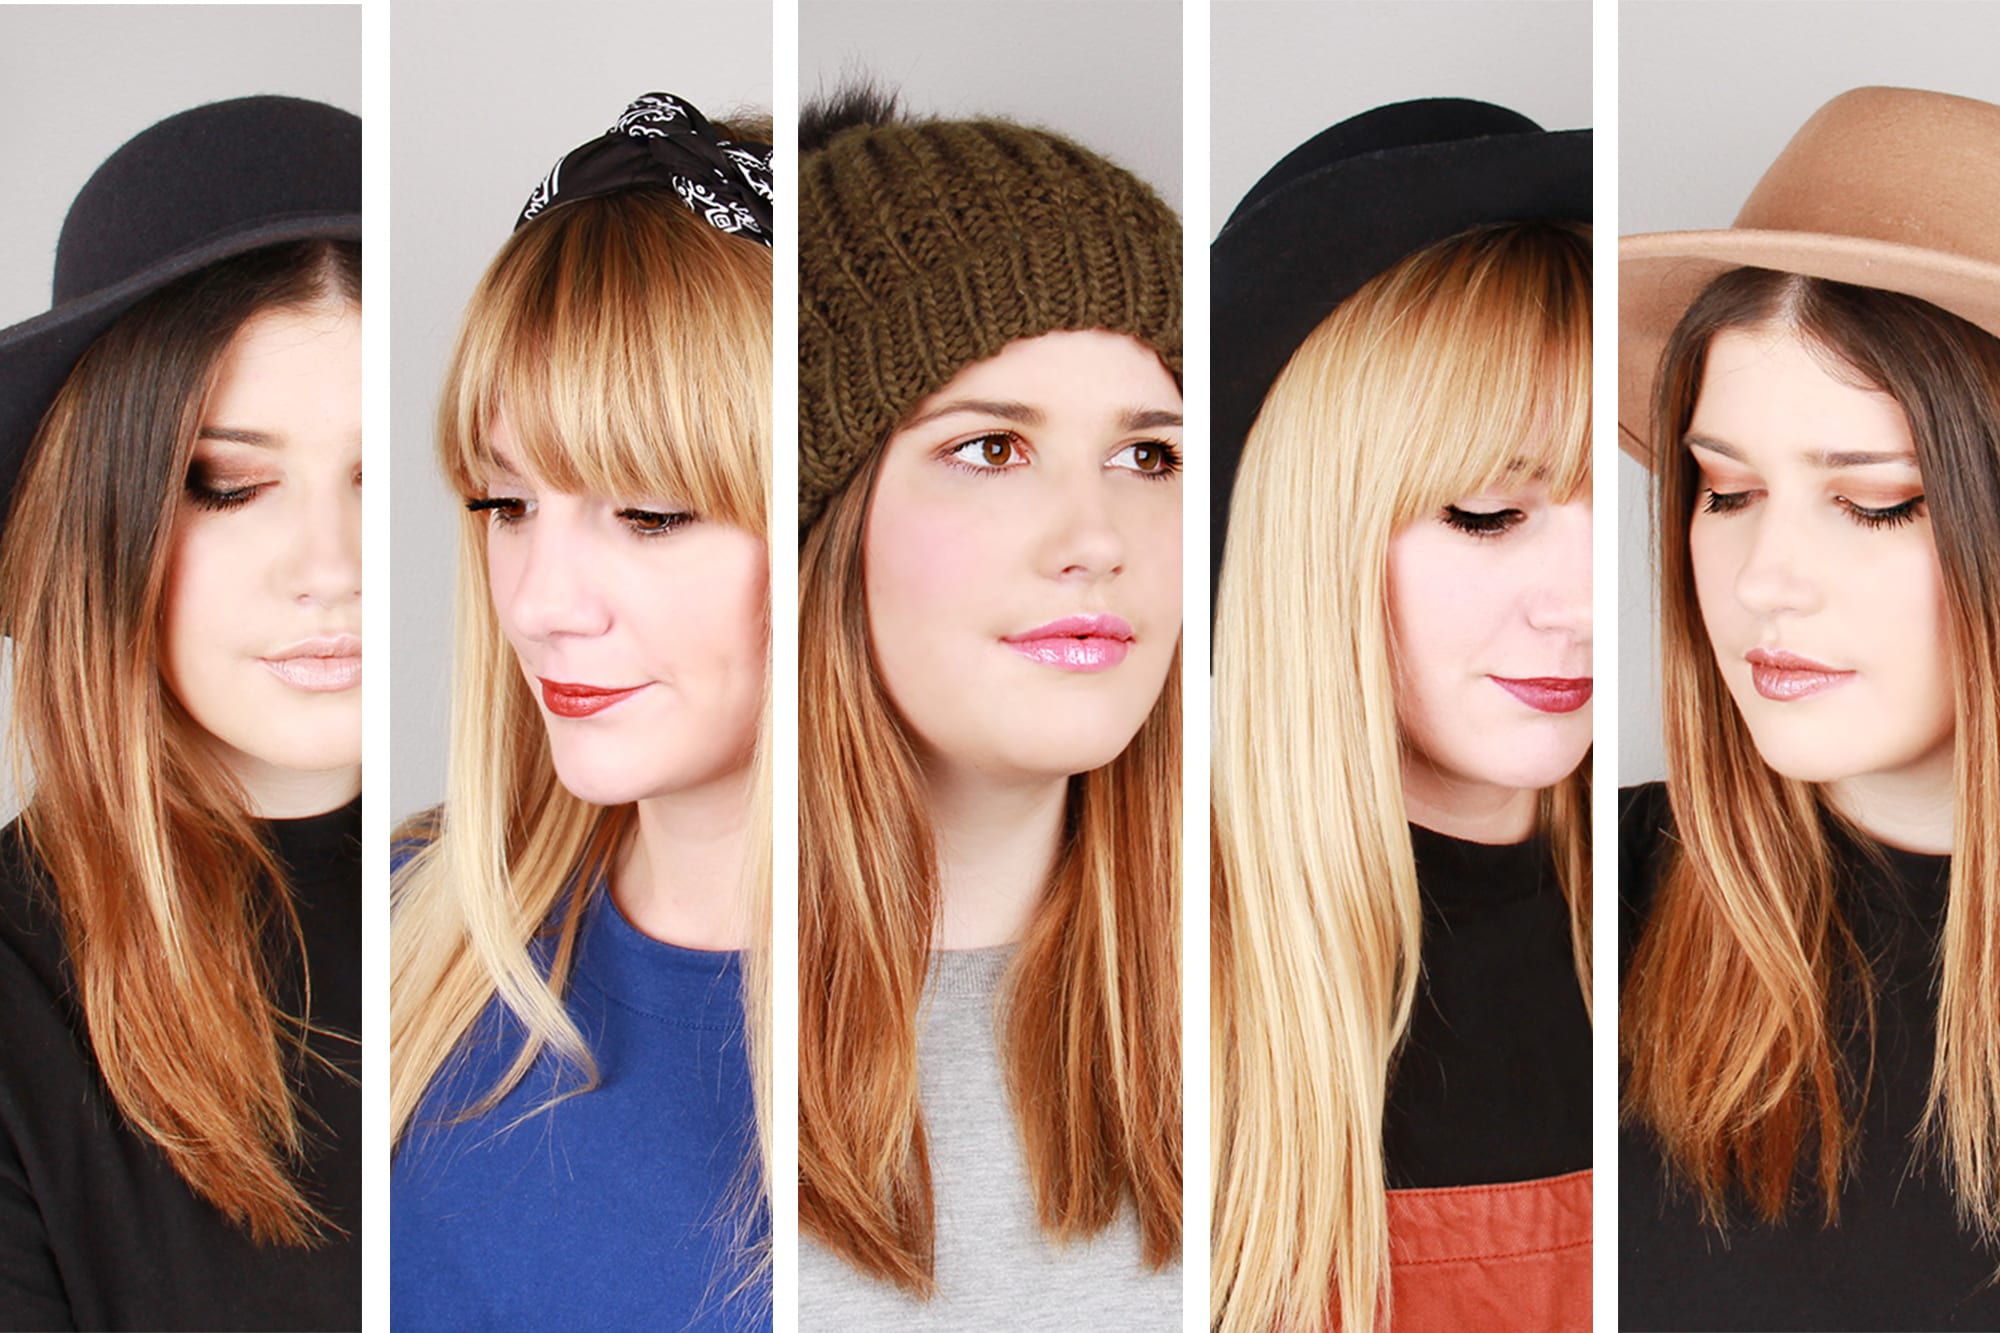 Hat Trick: The Pros Of Matching Your Makeup To Your Hat